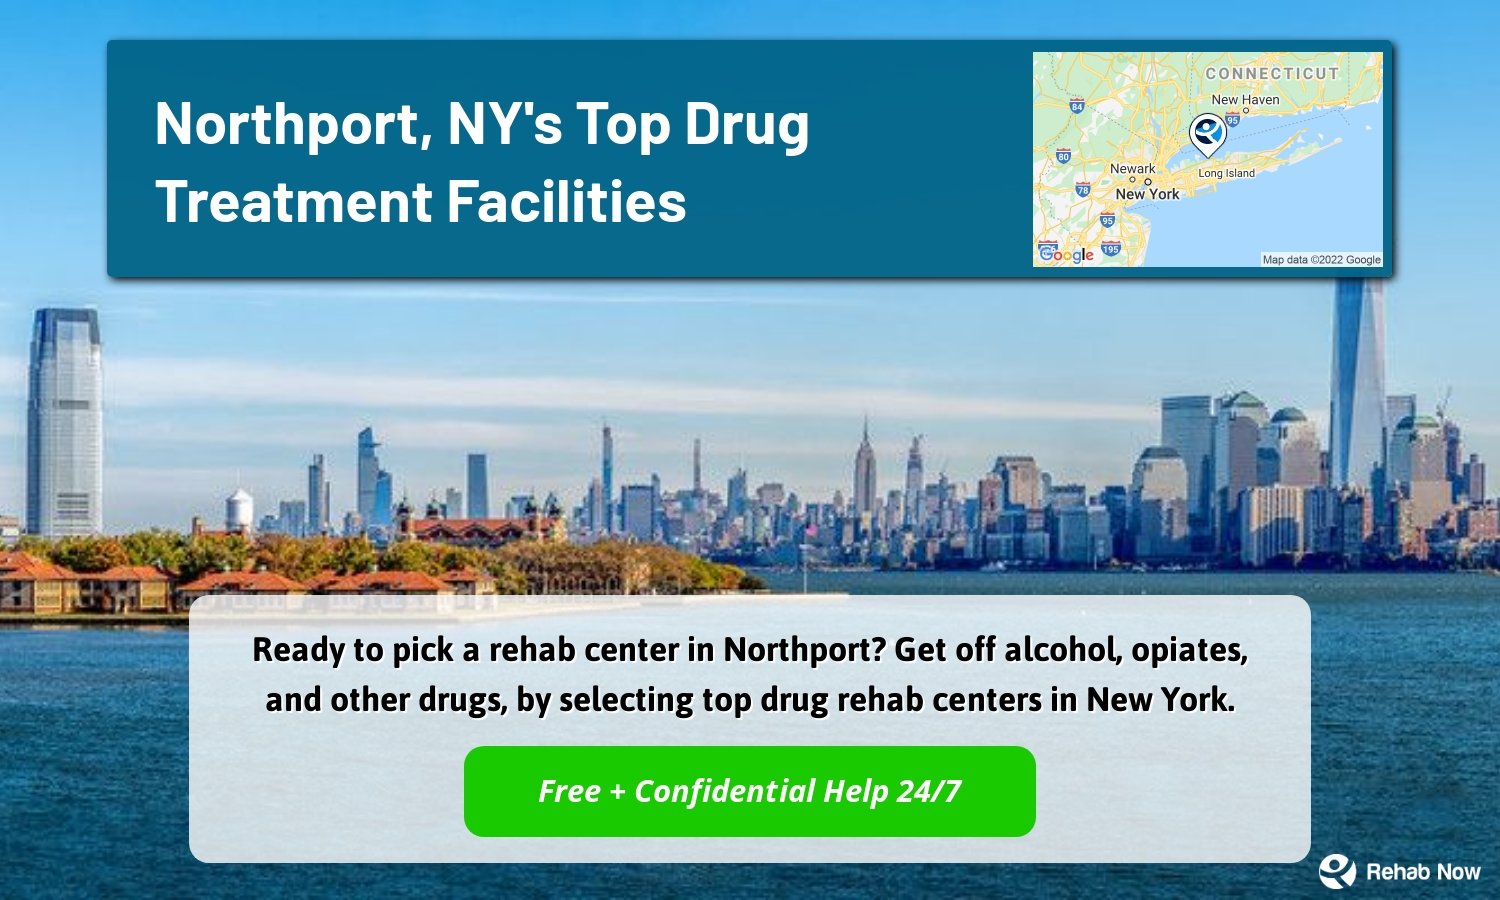 Ready to pick a rehab center in Northport? Get off alcohol, opiates, and other drugs, by selecting top drug rehab centers in New York.